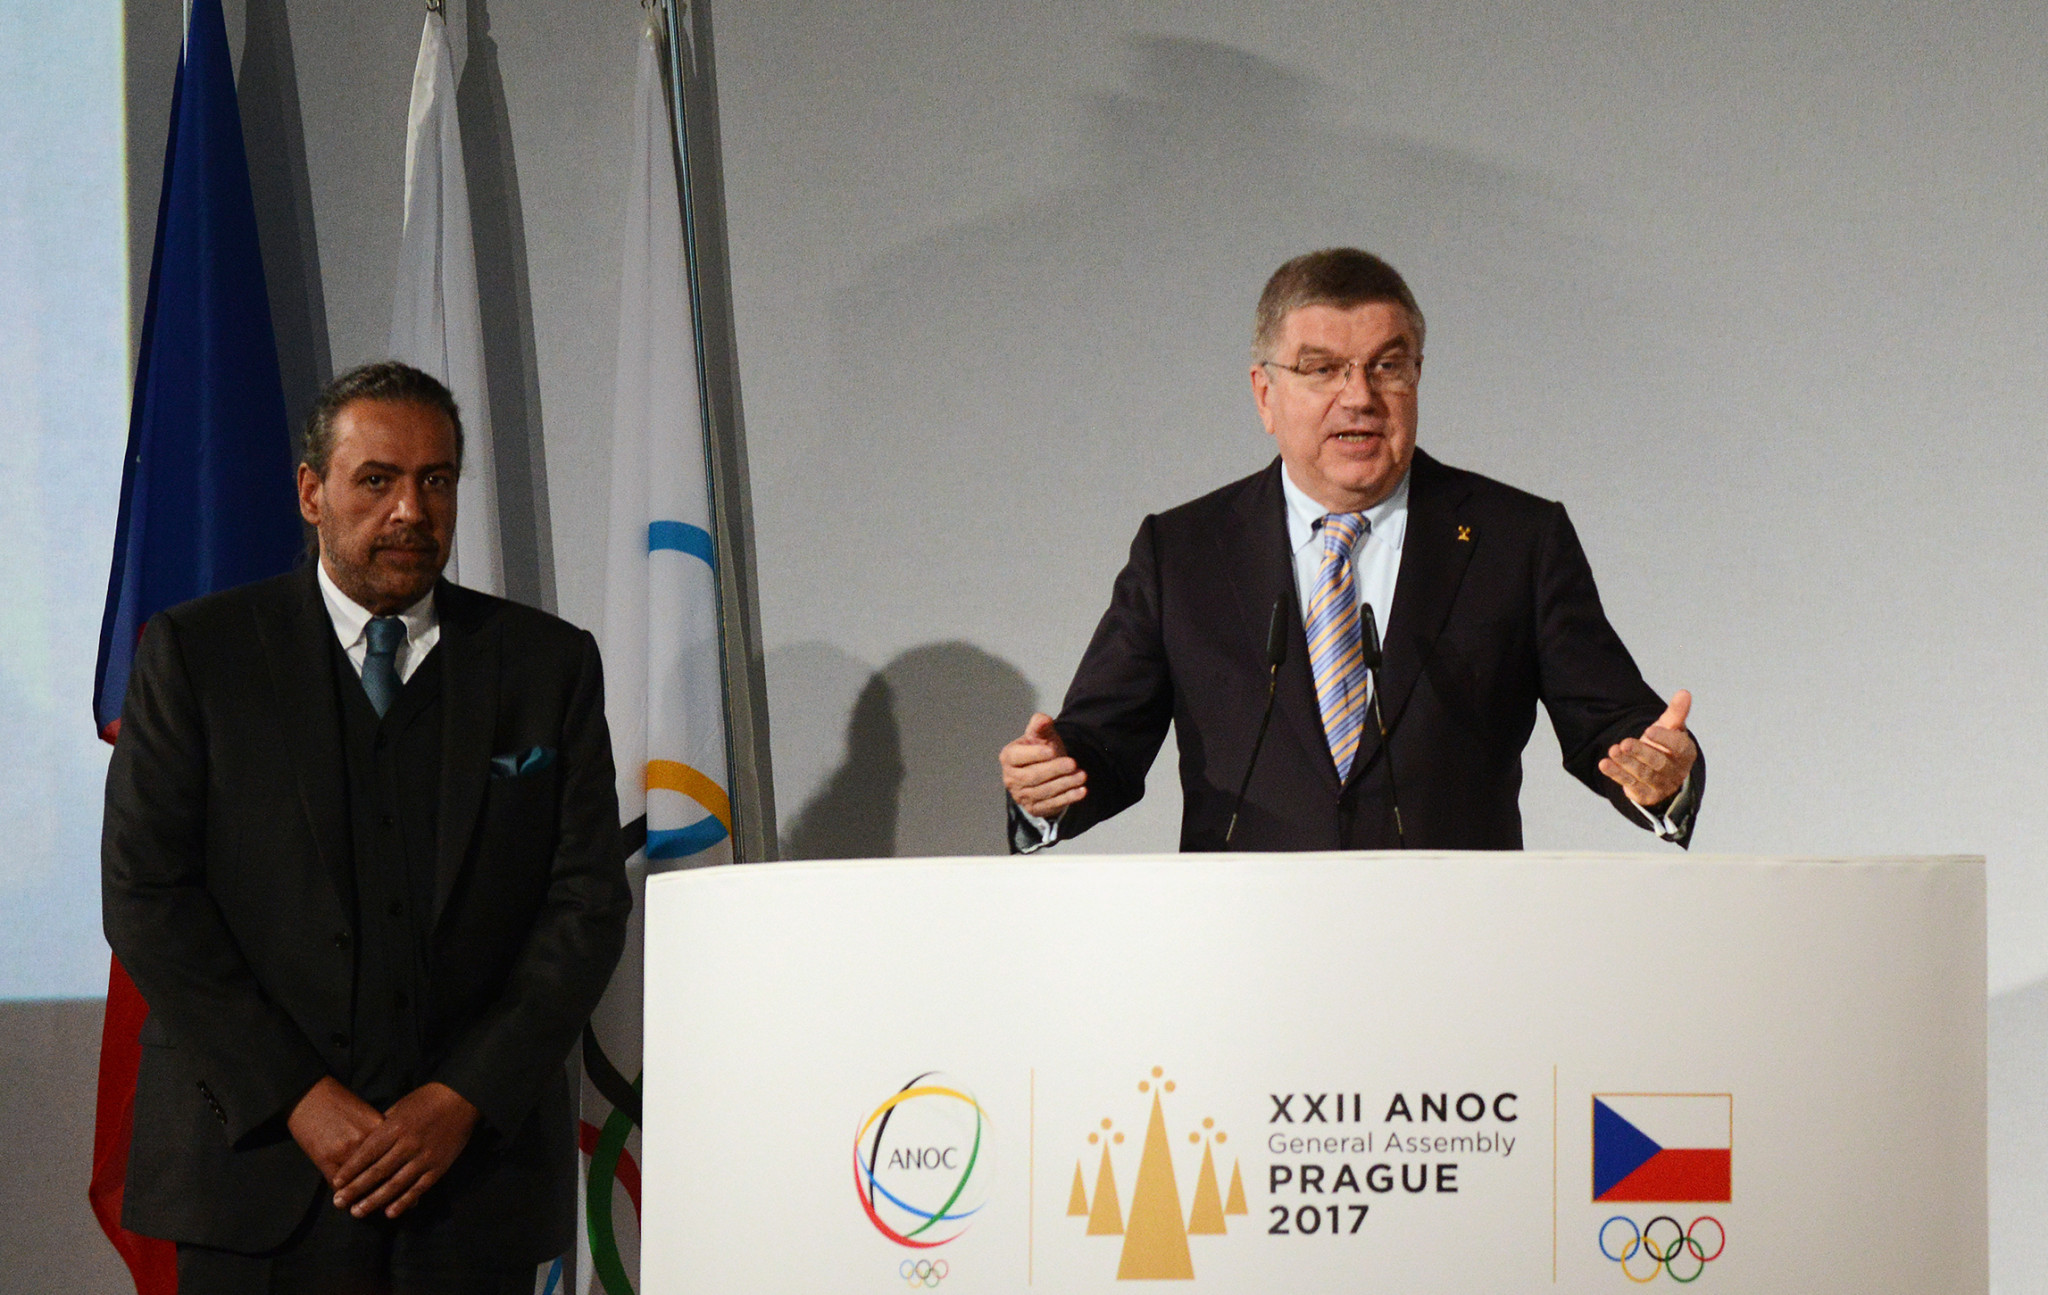 IOC President Thomas Bach, right, and ANOC counterpart Sheikh Ahmad Al-Fahad Al-Sabah are each attending the ANOC General Assembly ©Getty Images